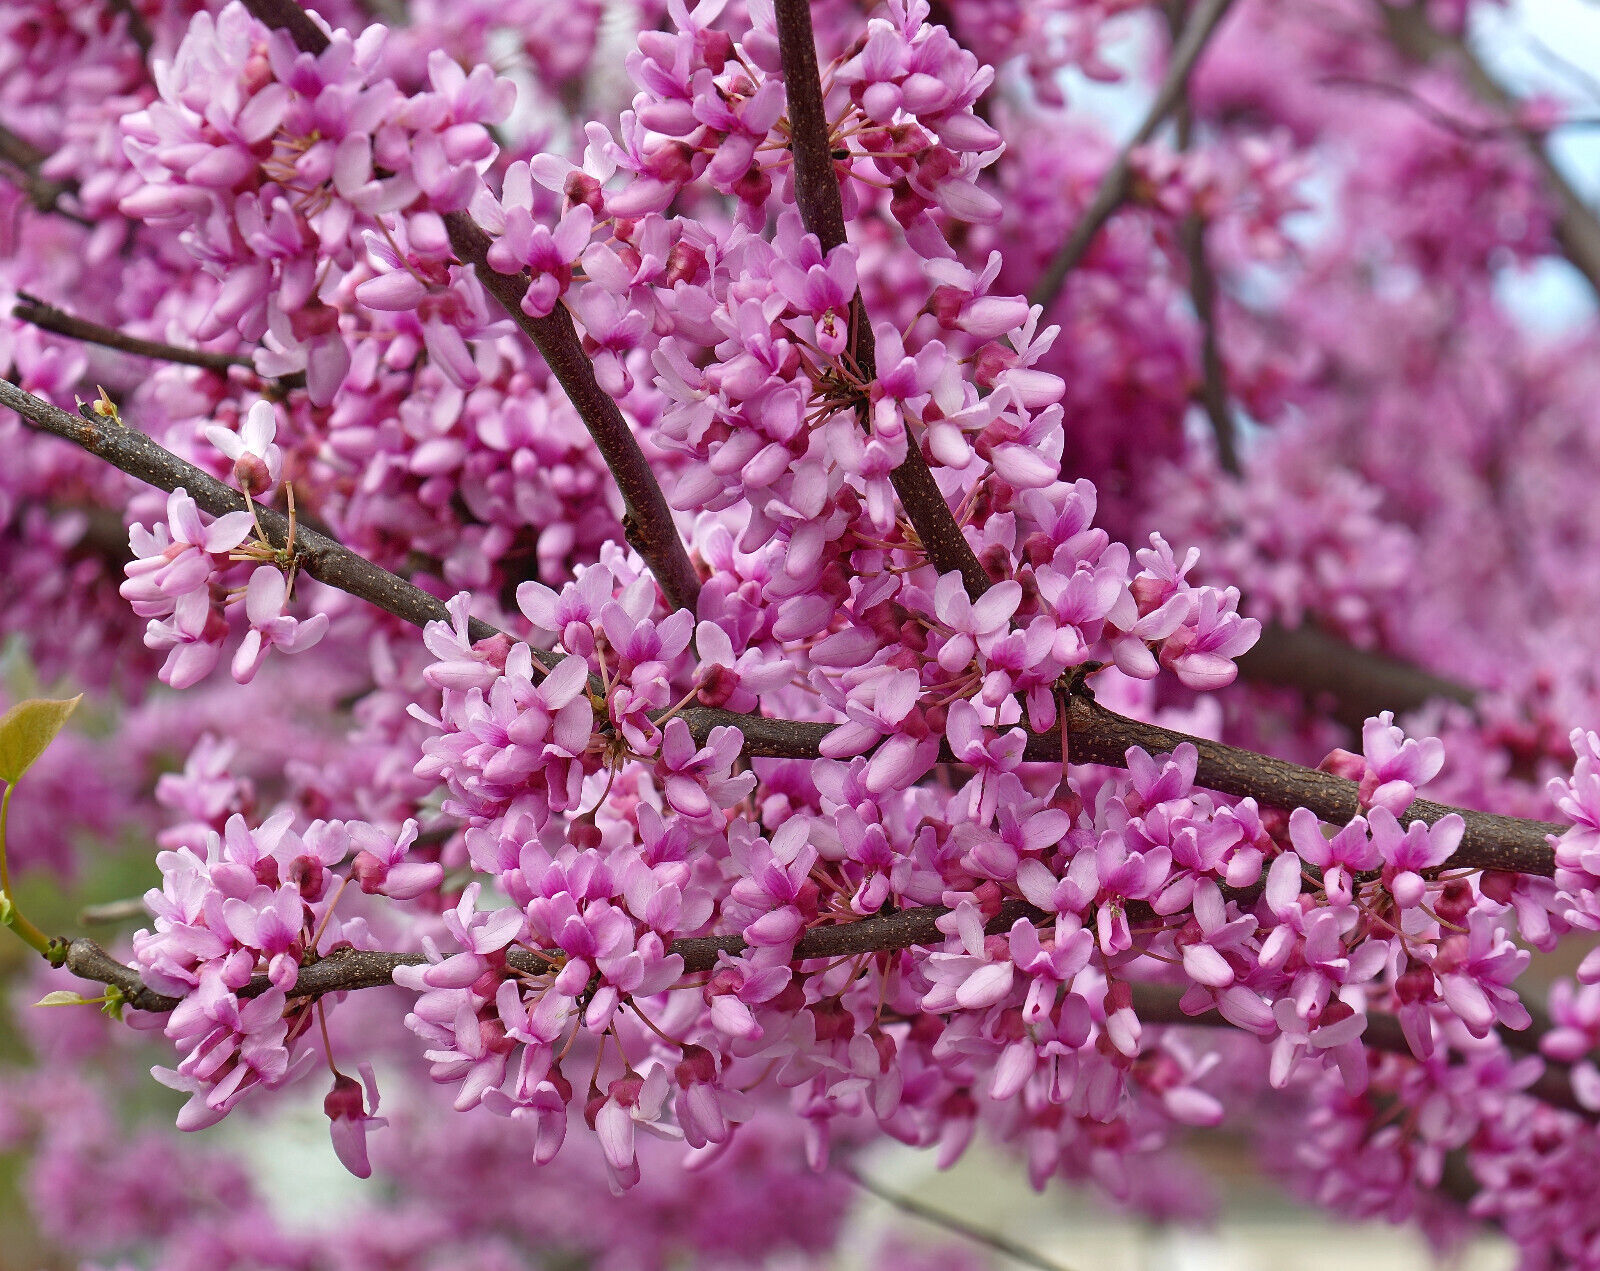 Eastern Redbud 24"-36" tall (Cercis canadensis)- Potted in 5" deep band pot - $29.65 - $79.15